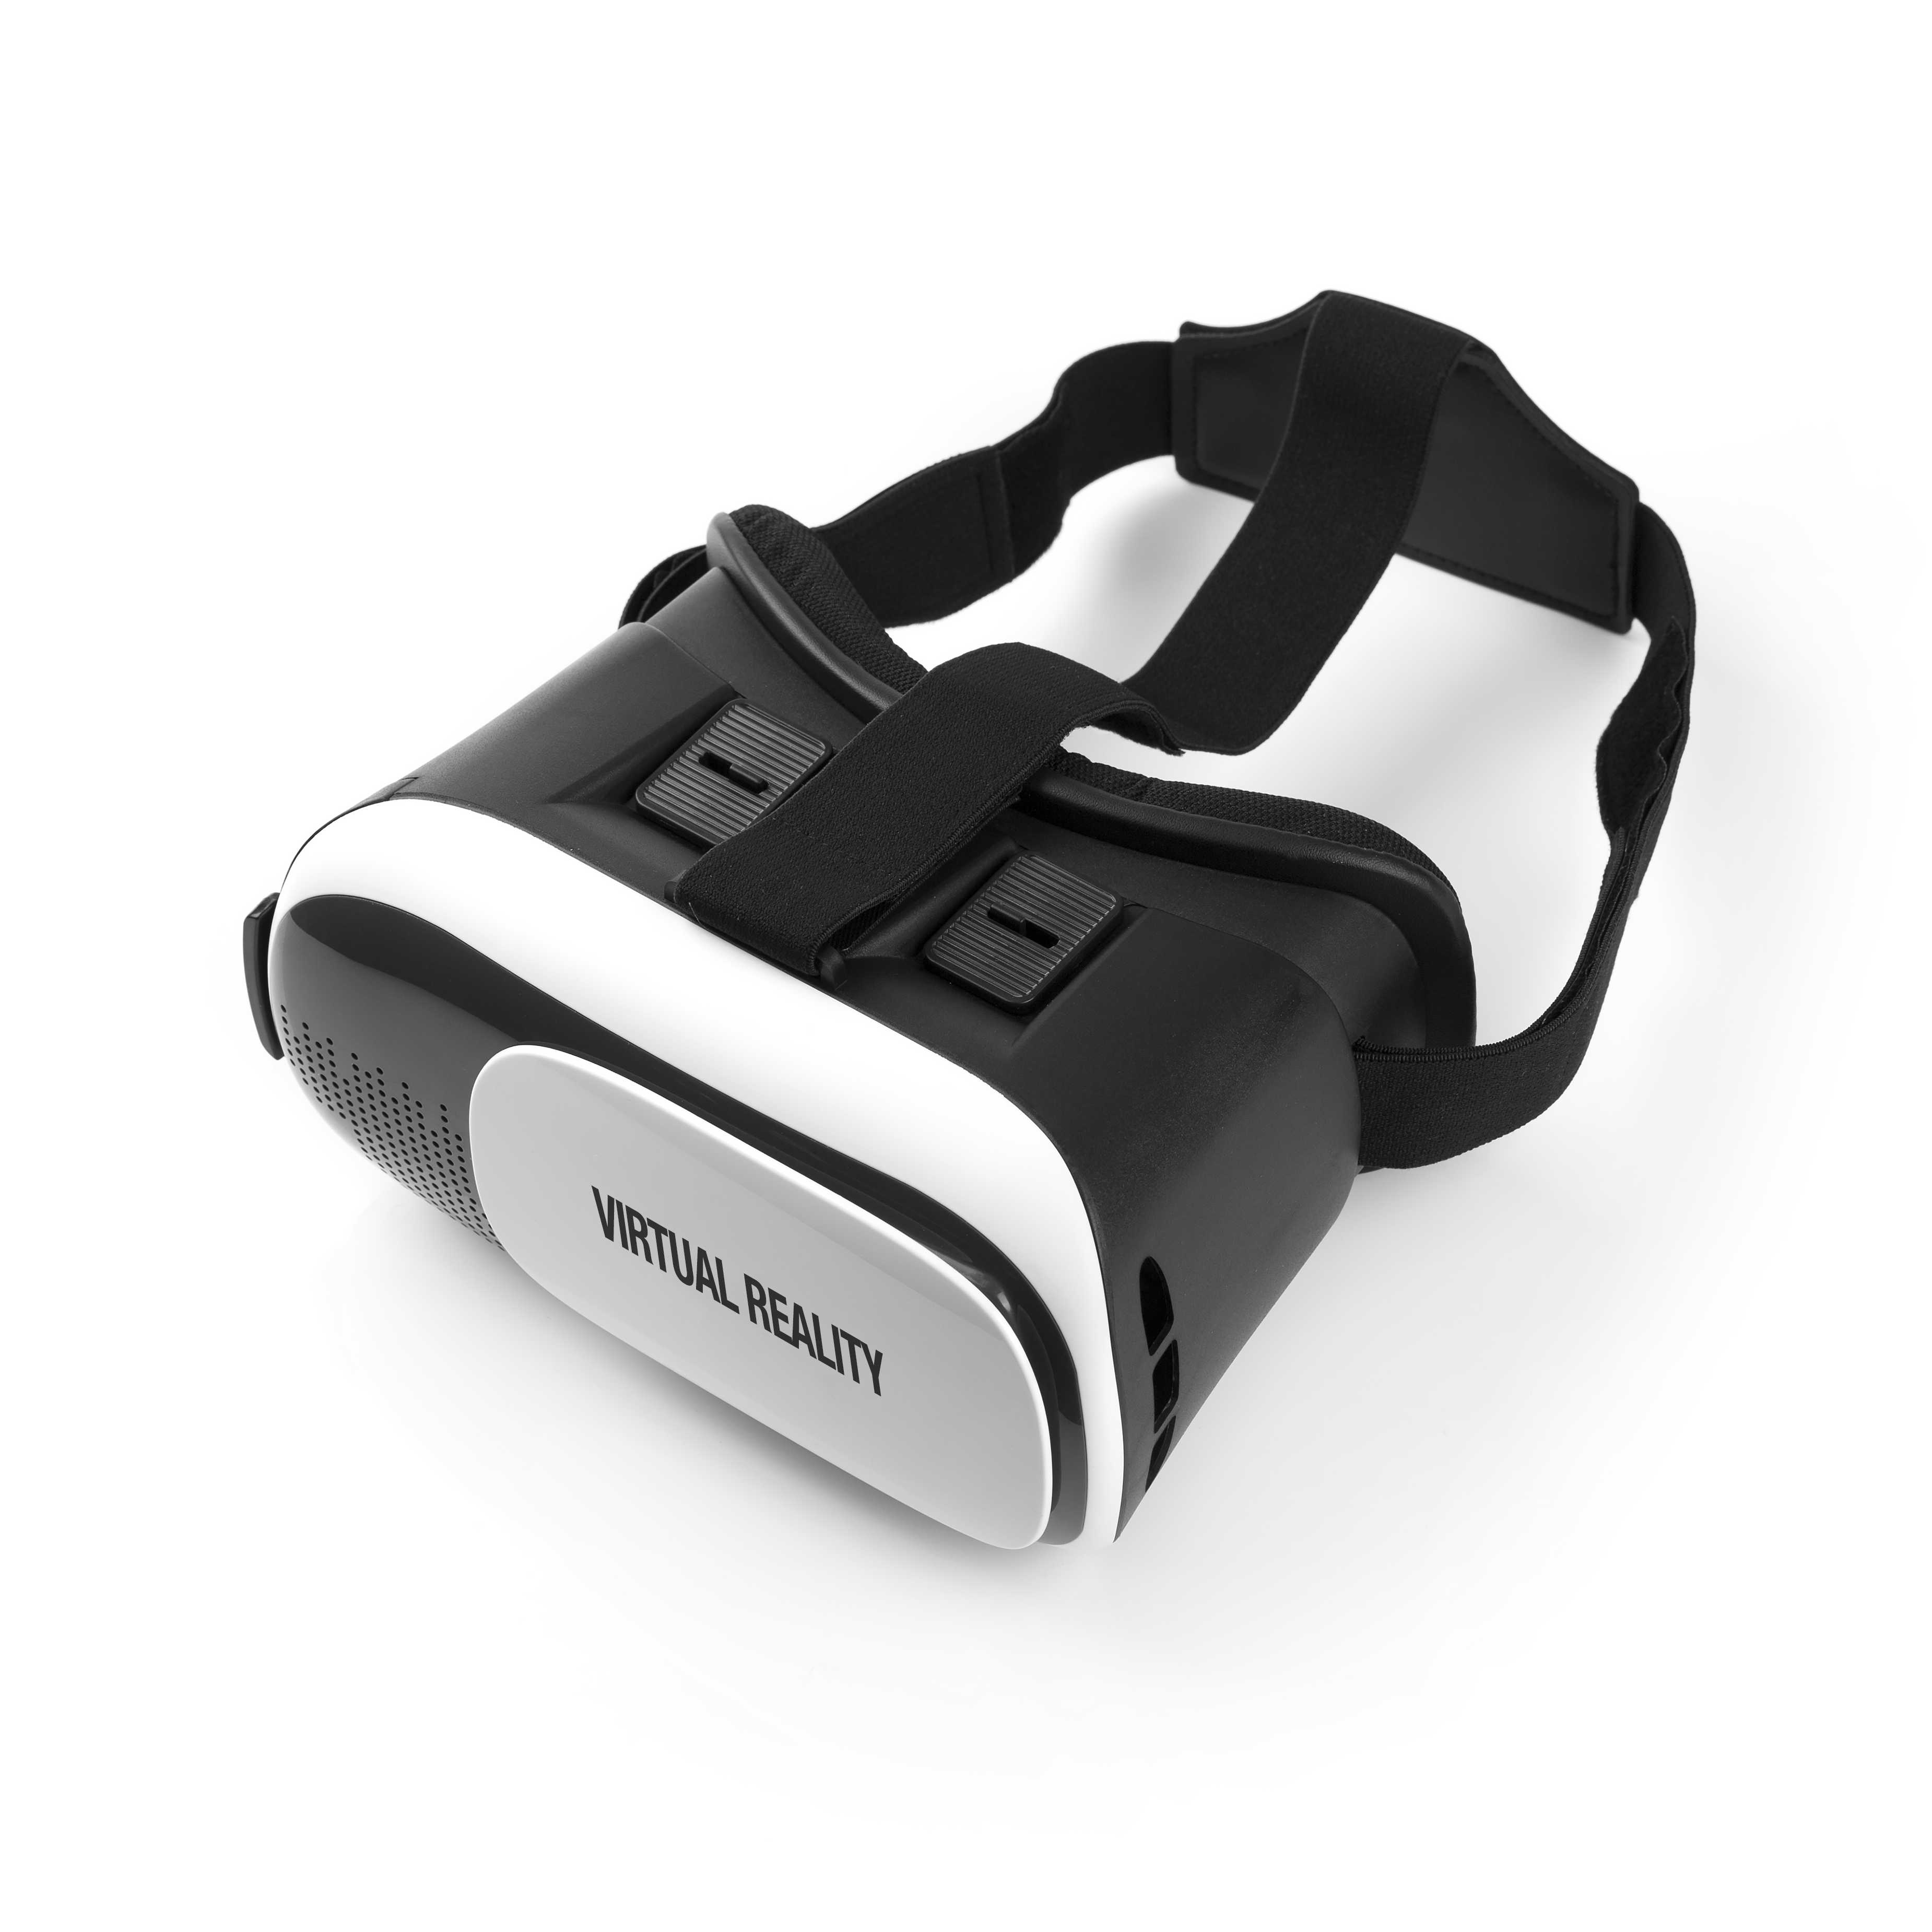 this is a picture of a mid range smartphone vr headset.